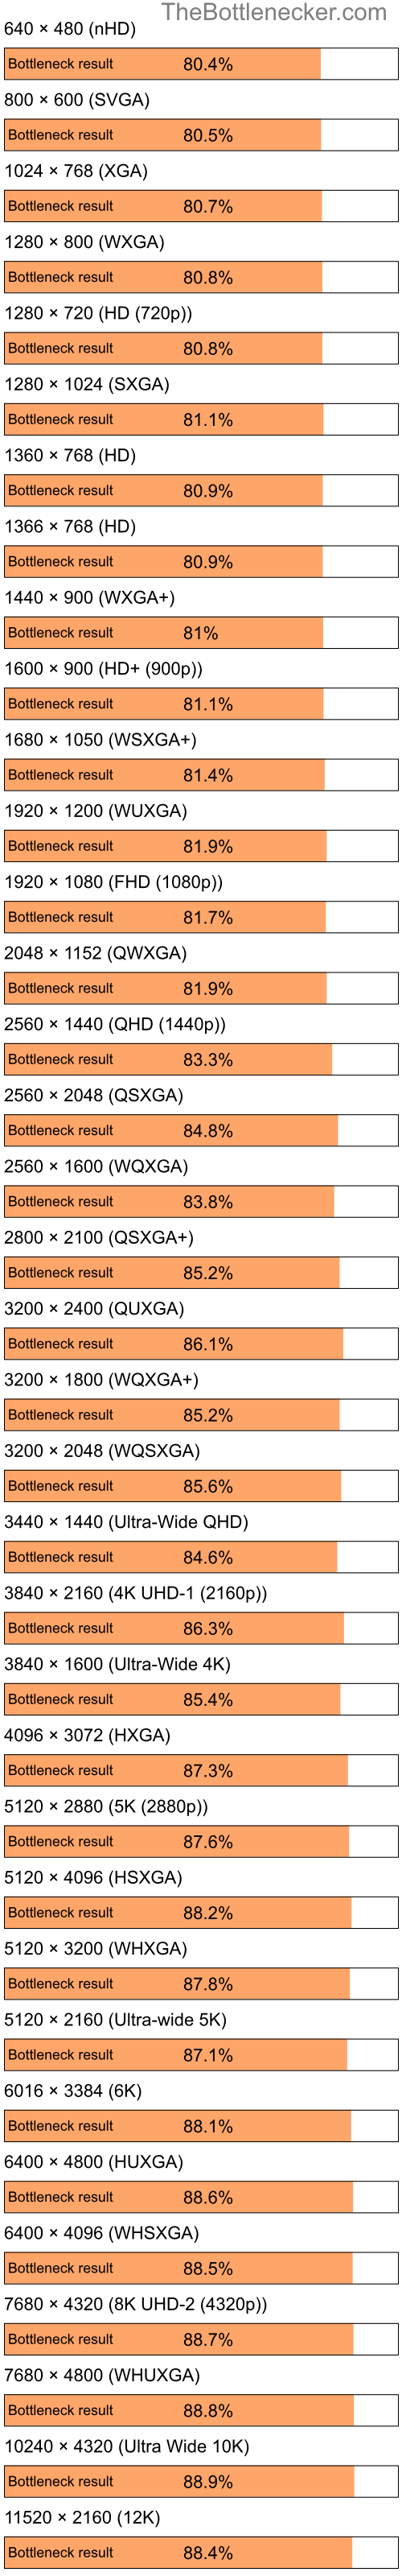 Bottleneck results by resolution for Intel Celeron M 420 and NVIDIA GeForce FX 5900XT in Graphic Card Intense Tasks